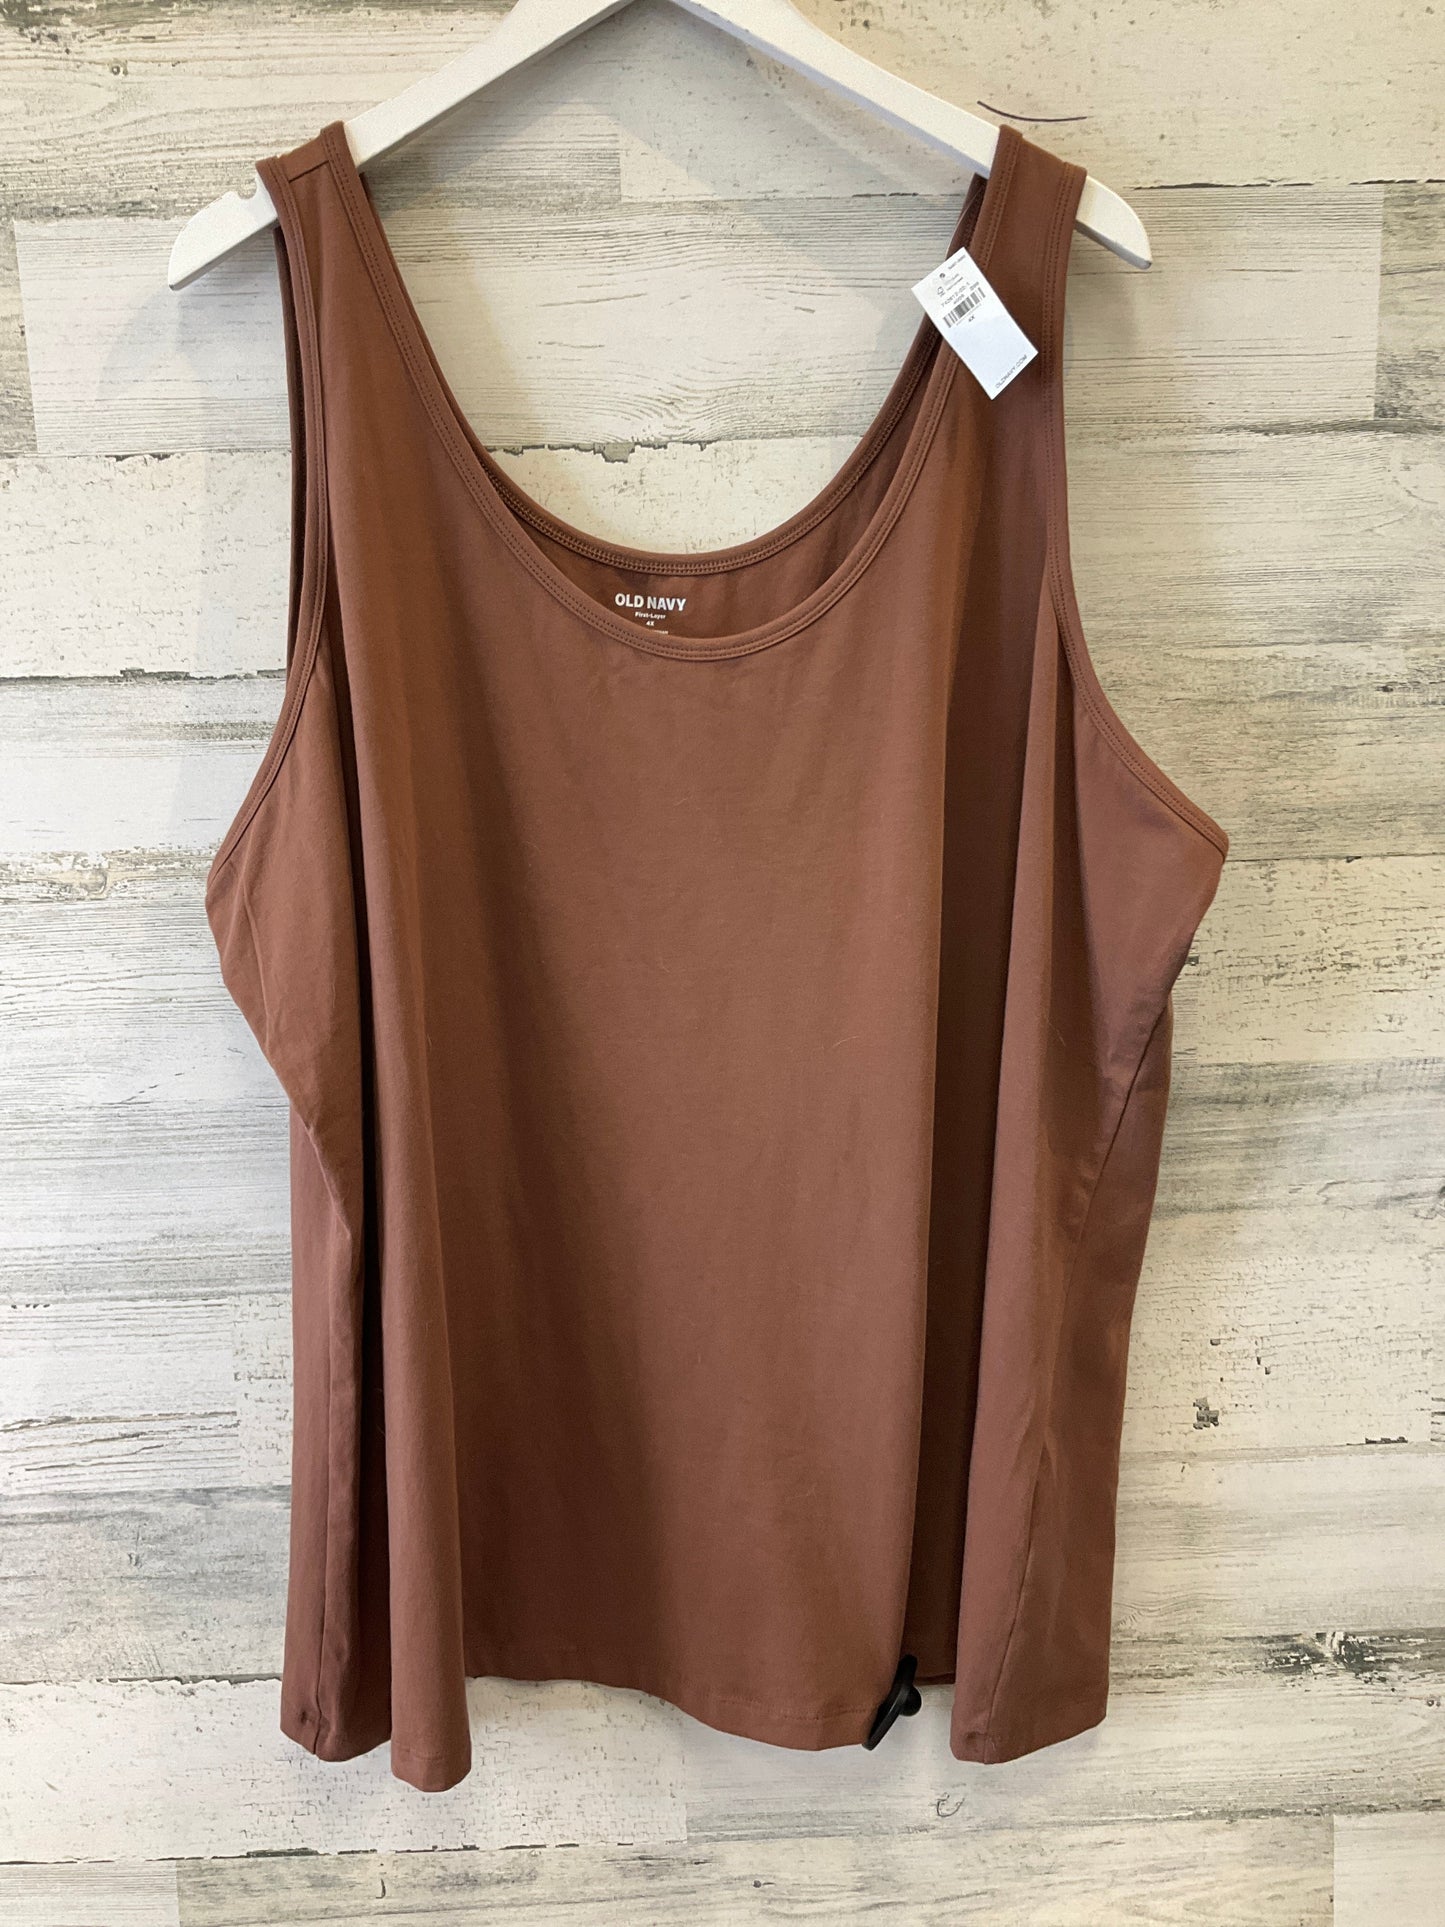 Brown Tank Top Old Navy, Size 4x